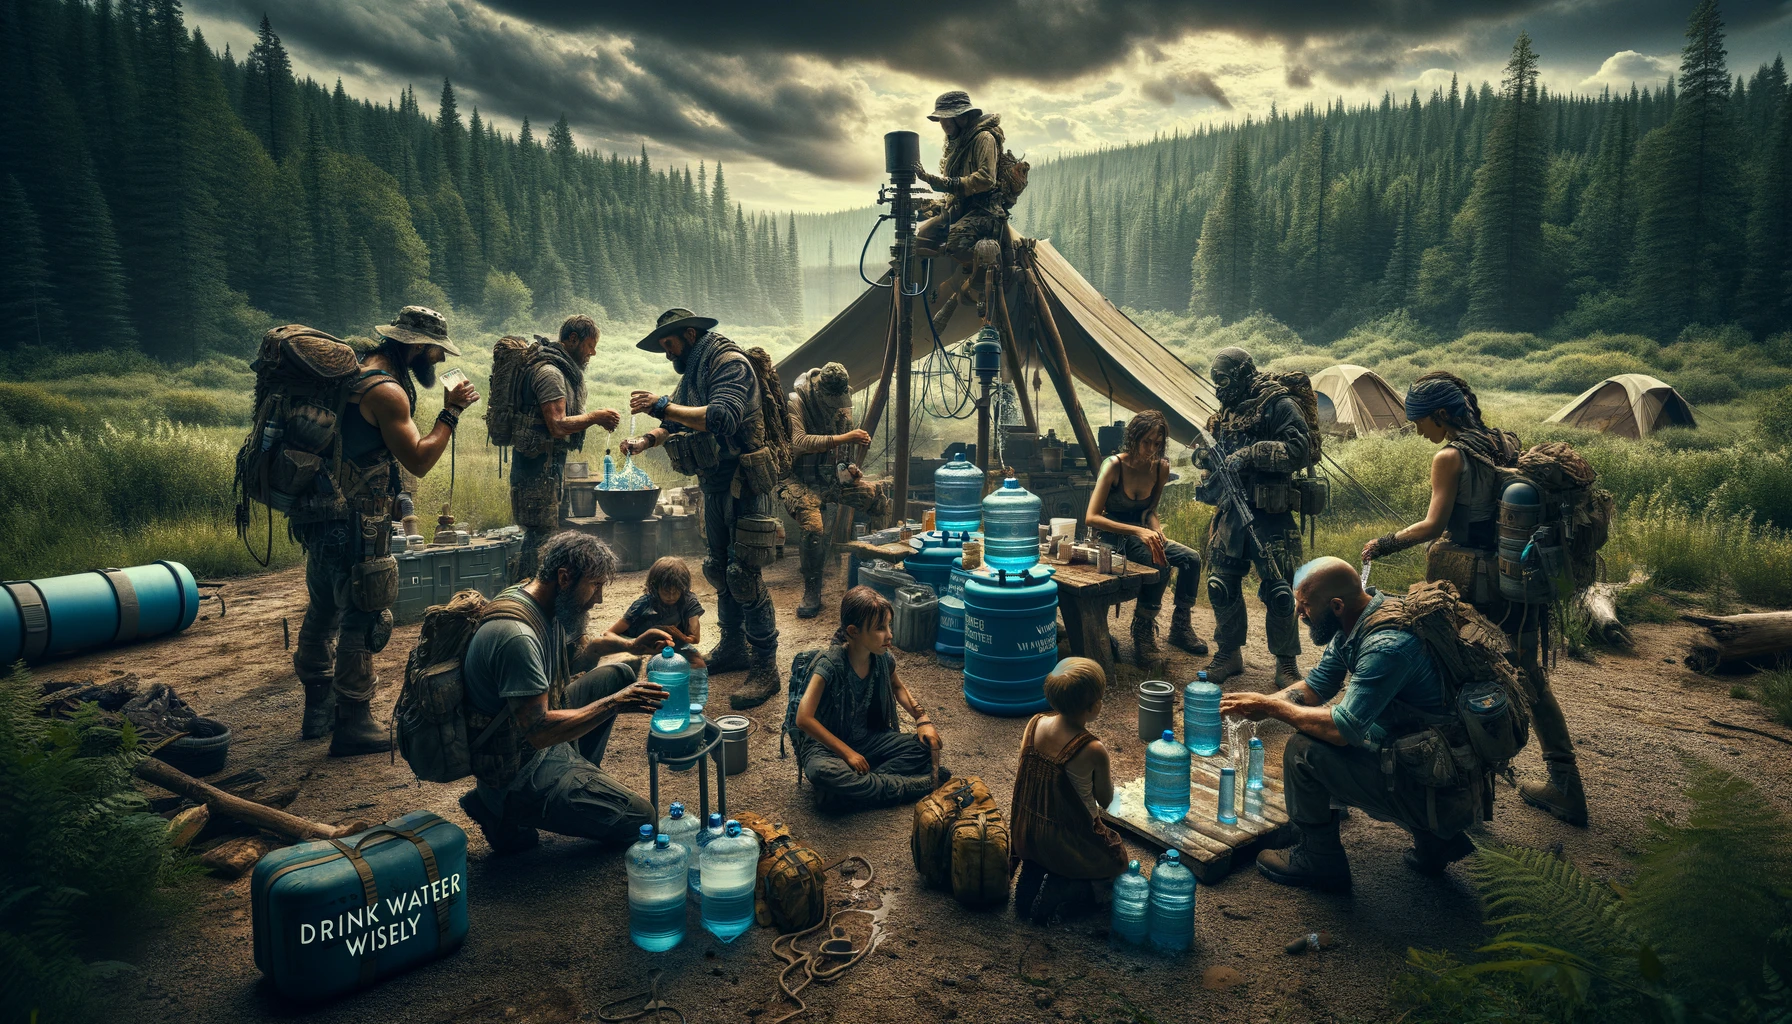 Survivors in a post-apocalyptic world manage their water resources wisely at a campsite, engaging in strategic water consumption practices. Equipped with survival gear including water filters and portable desalination units, they teach the importance of water conservation. The setting blends a secure campsite with untamed nature, symbolizing human resilience and the need for harmony with nature, emphasizing the critical message of drinking water wisely in survival situations